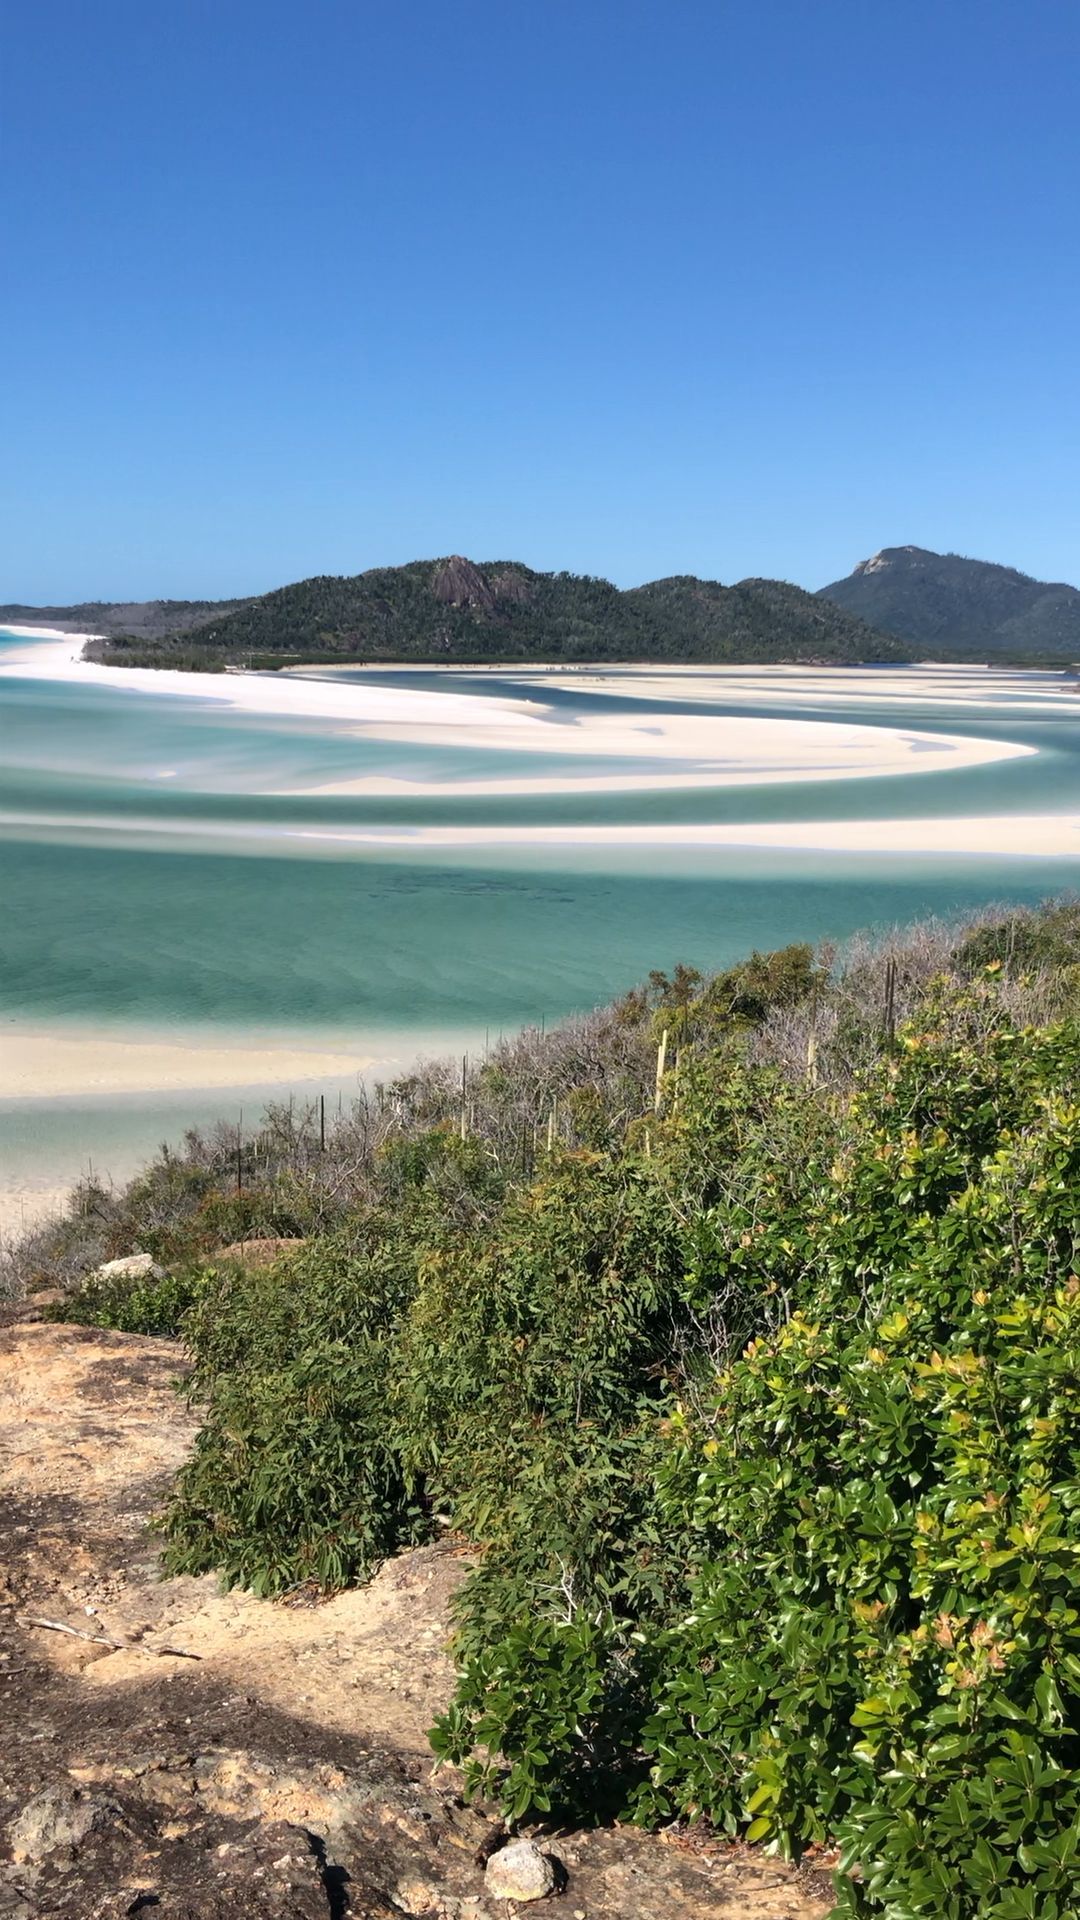 Beaches Australia - Is Whitsunday's the World's Best Beach? - Beaches Australia - Is Whitsunday's the World's Best Beach? -   17 beauty Videos places ideas